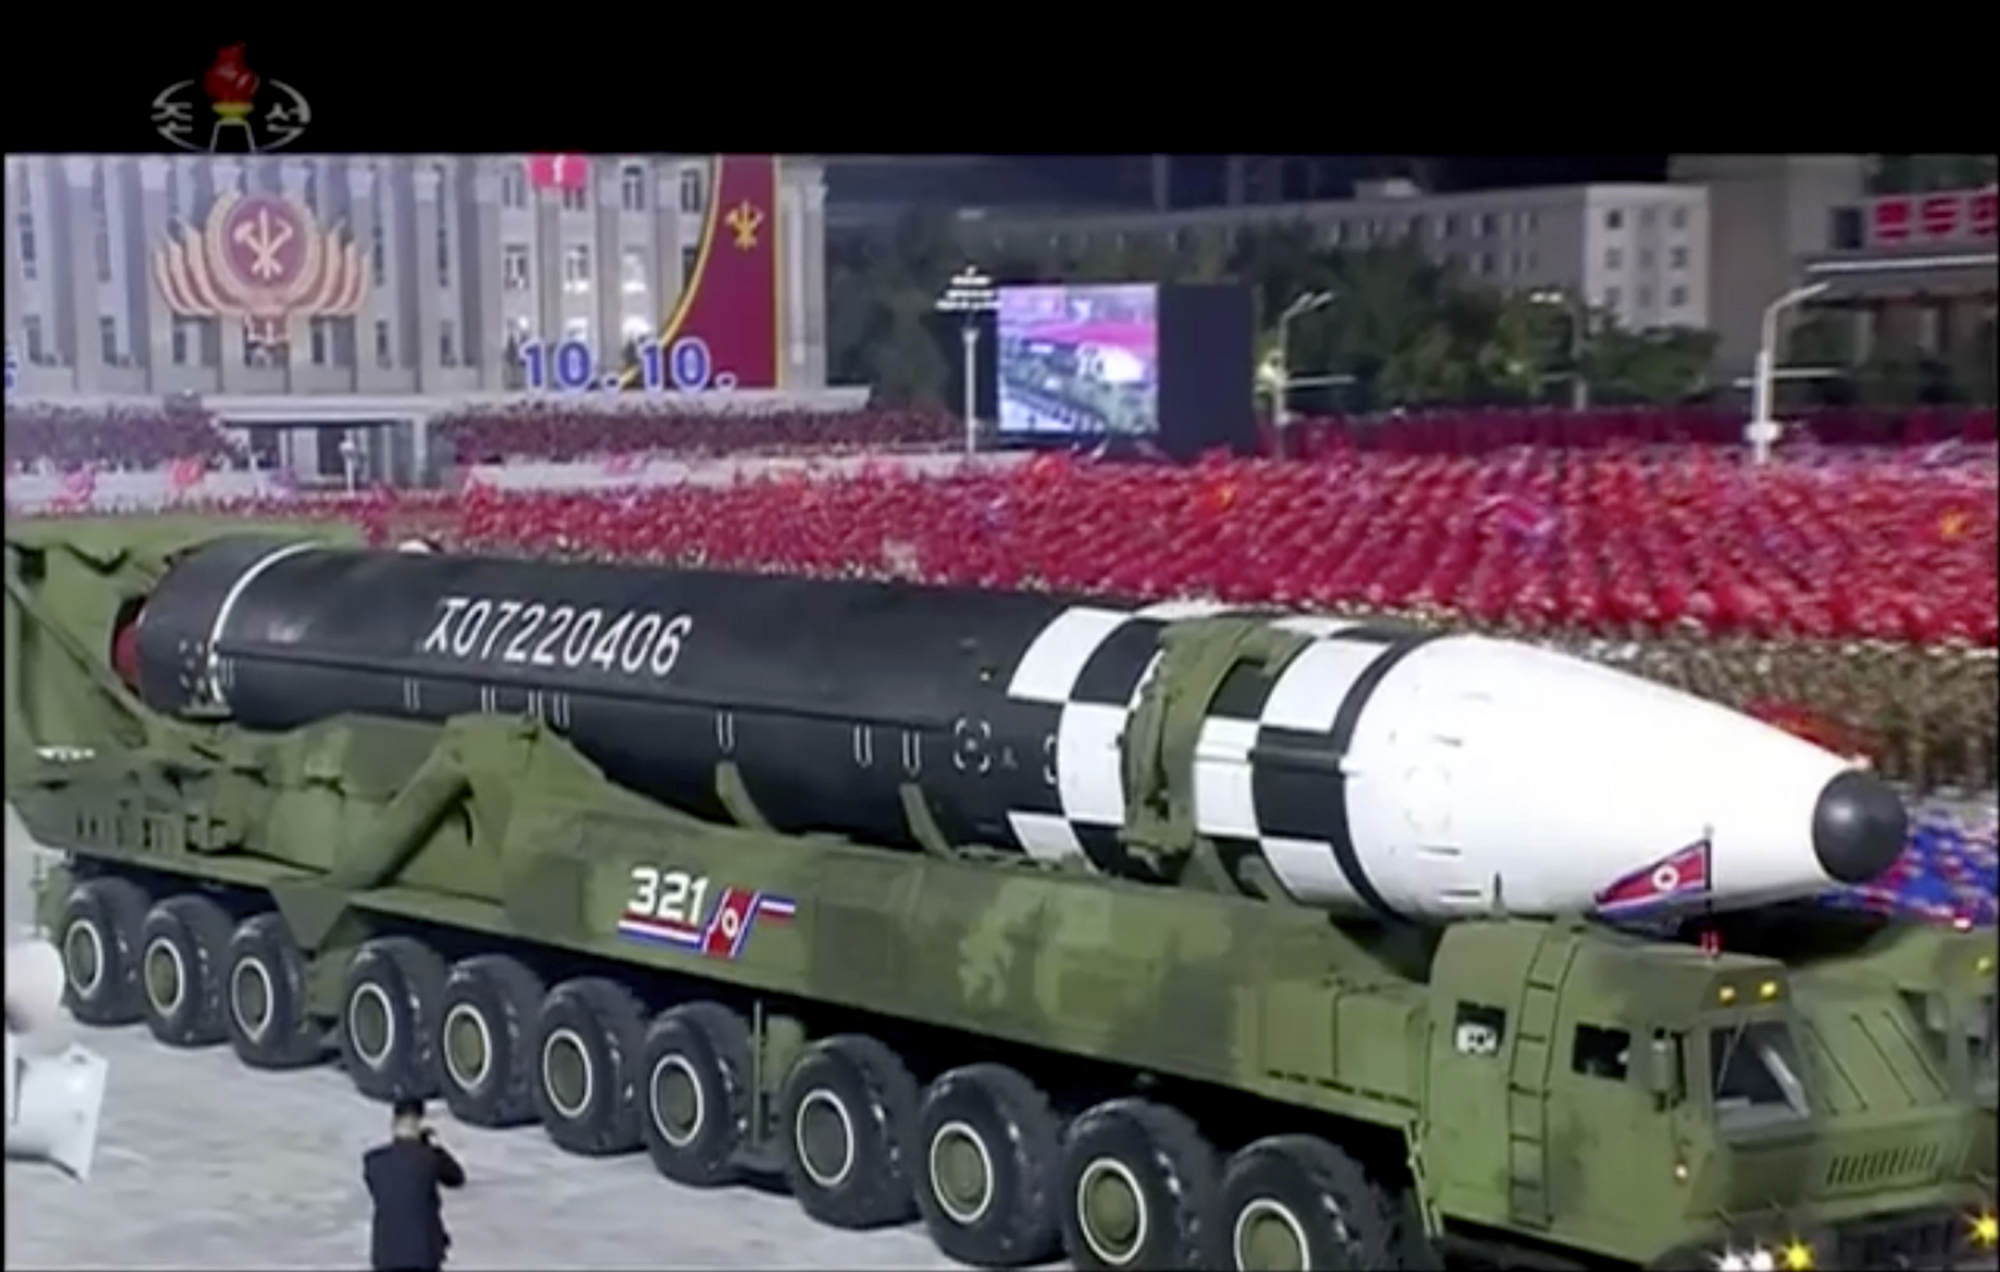 North Korea appears to parade new ballistic missile, possibly largest yet |  The Times of Israel